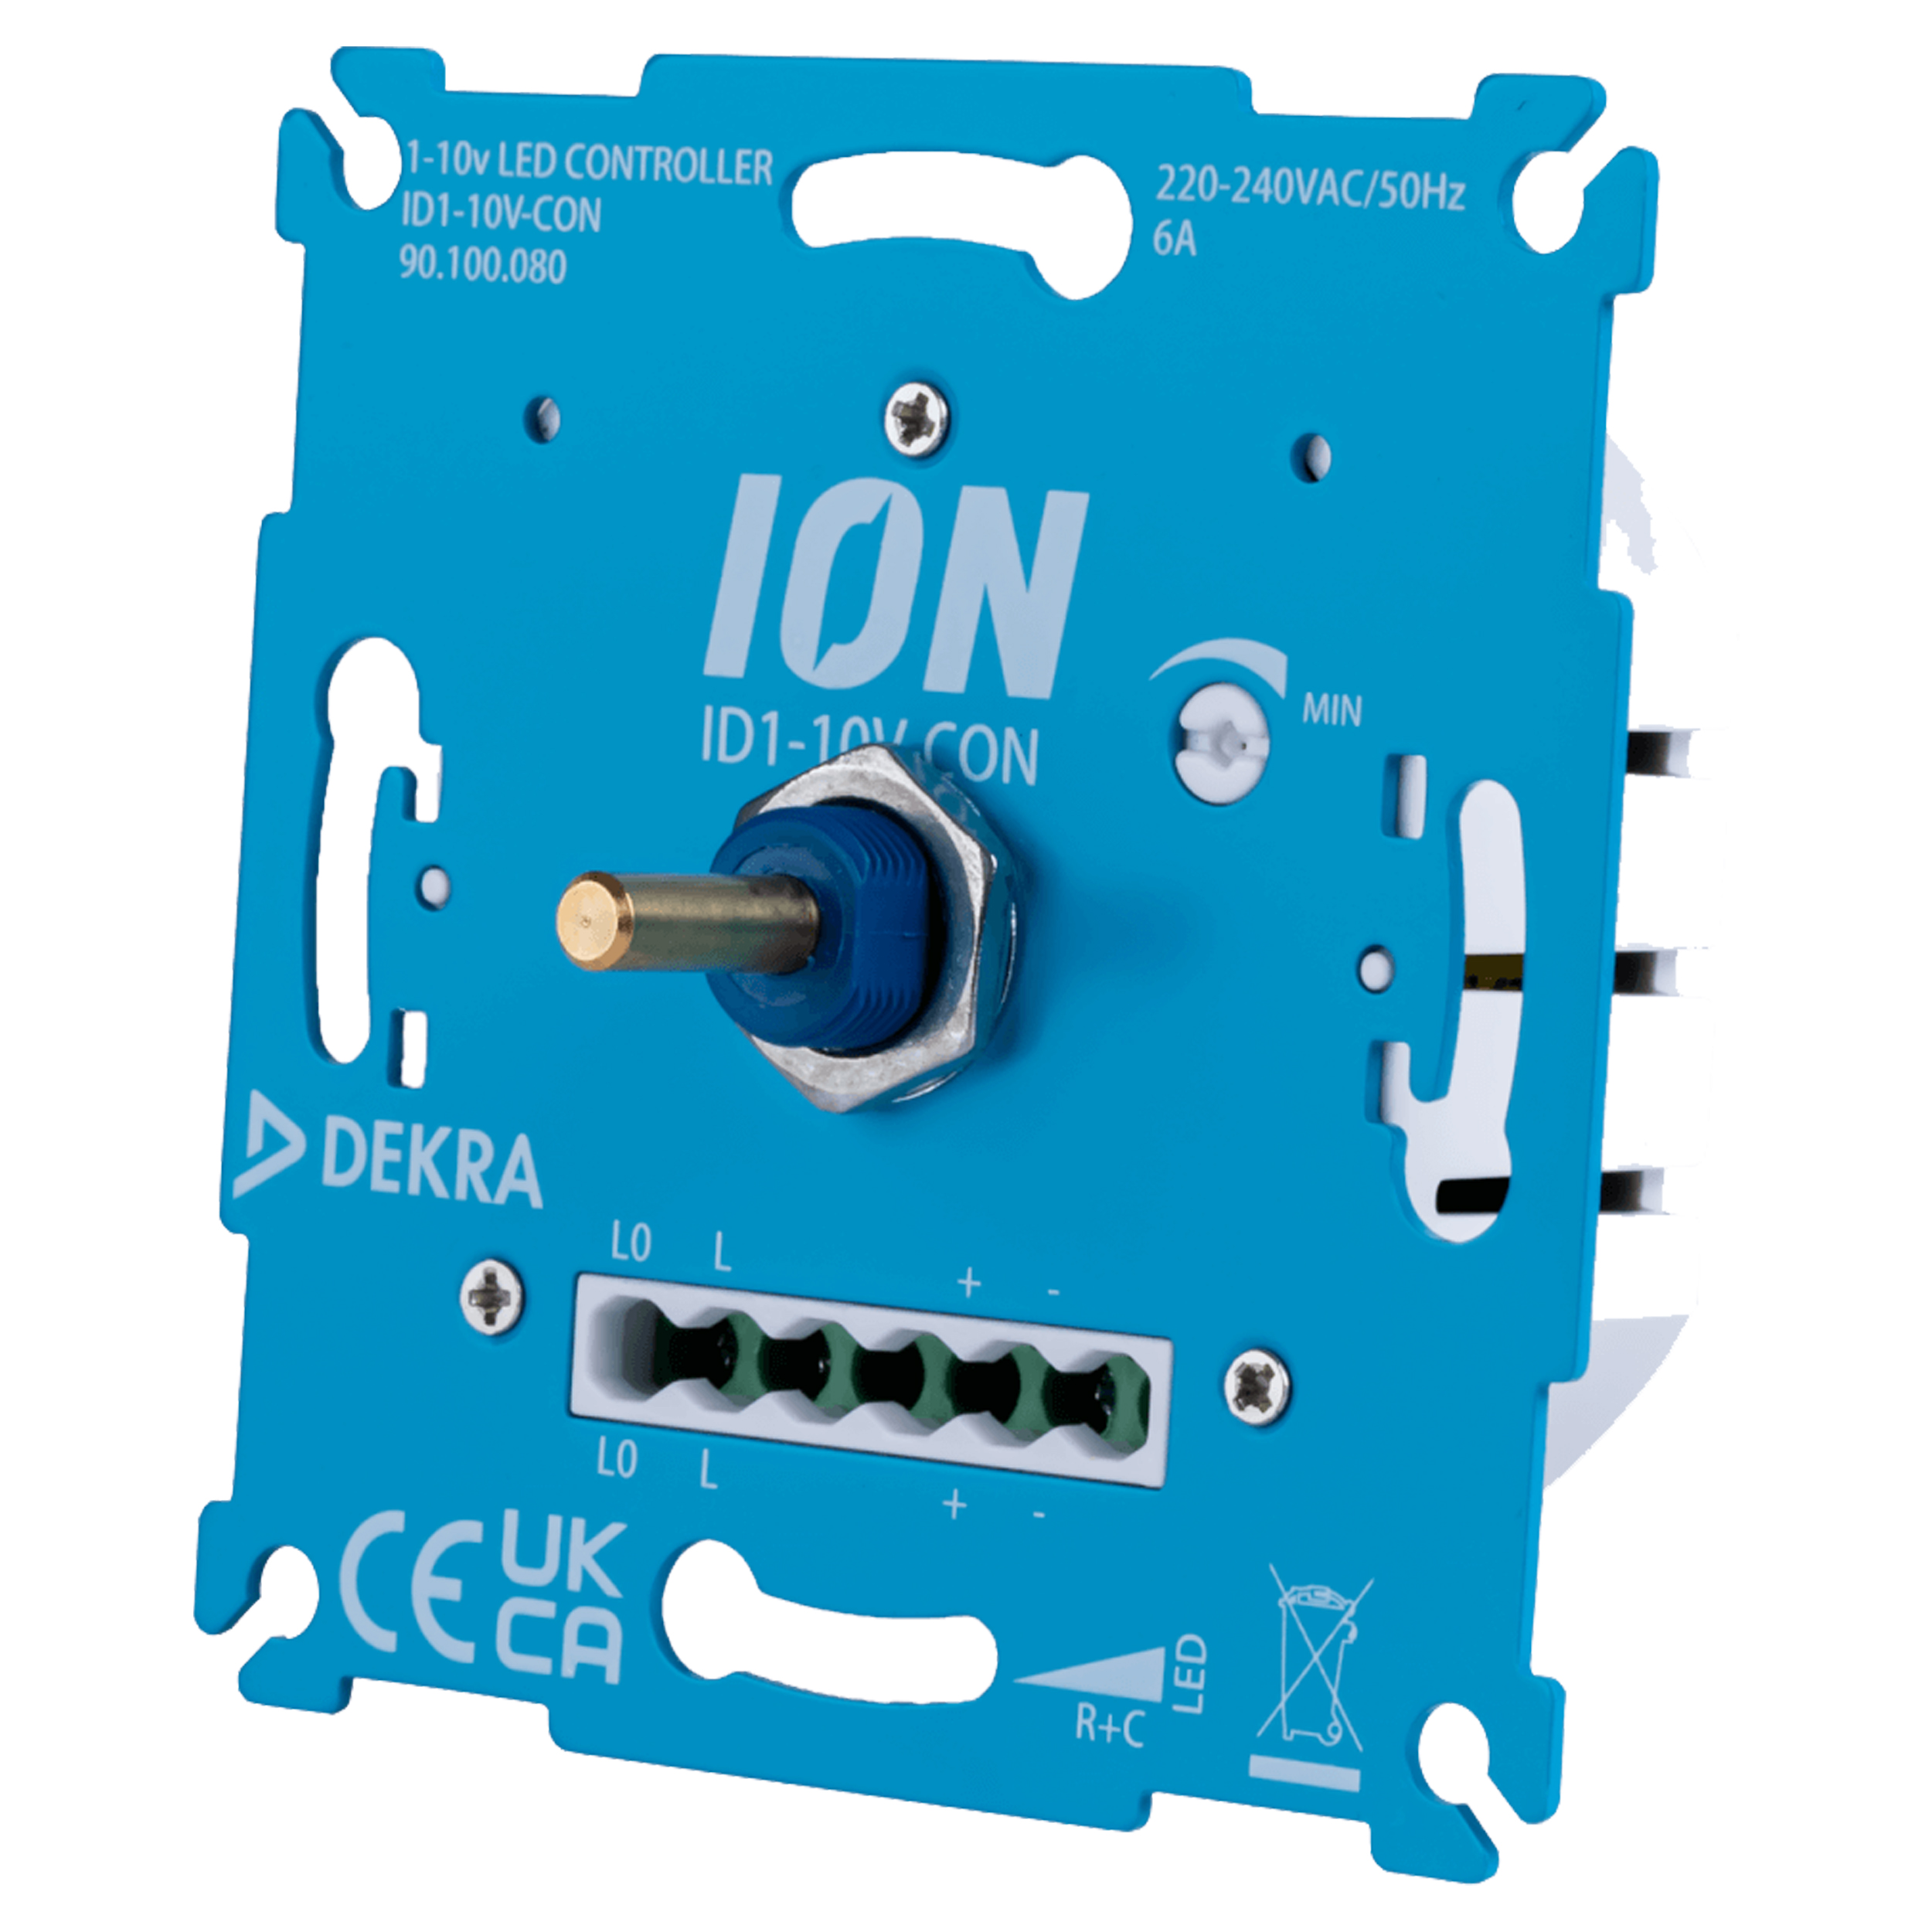 66.099.52 ION Industries  dimmer inbouw - LED - controller - 1-10V - RC element - blauw